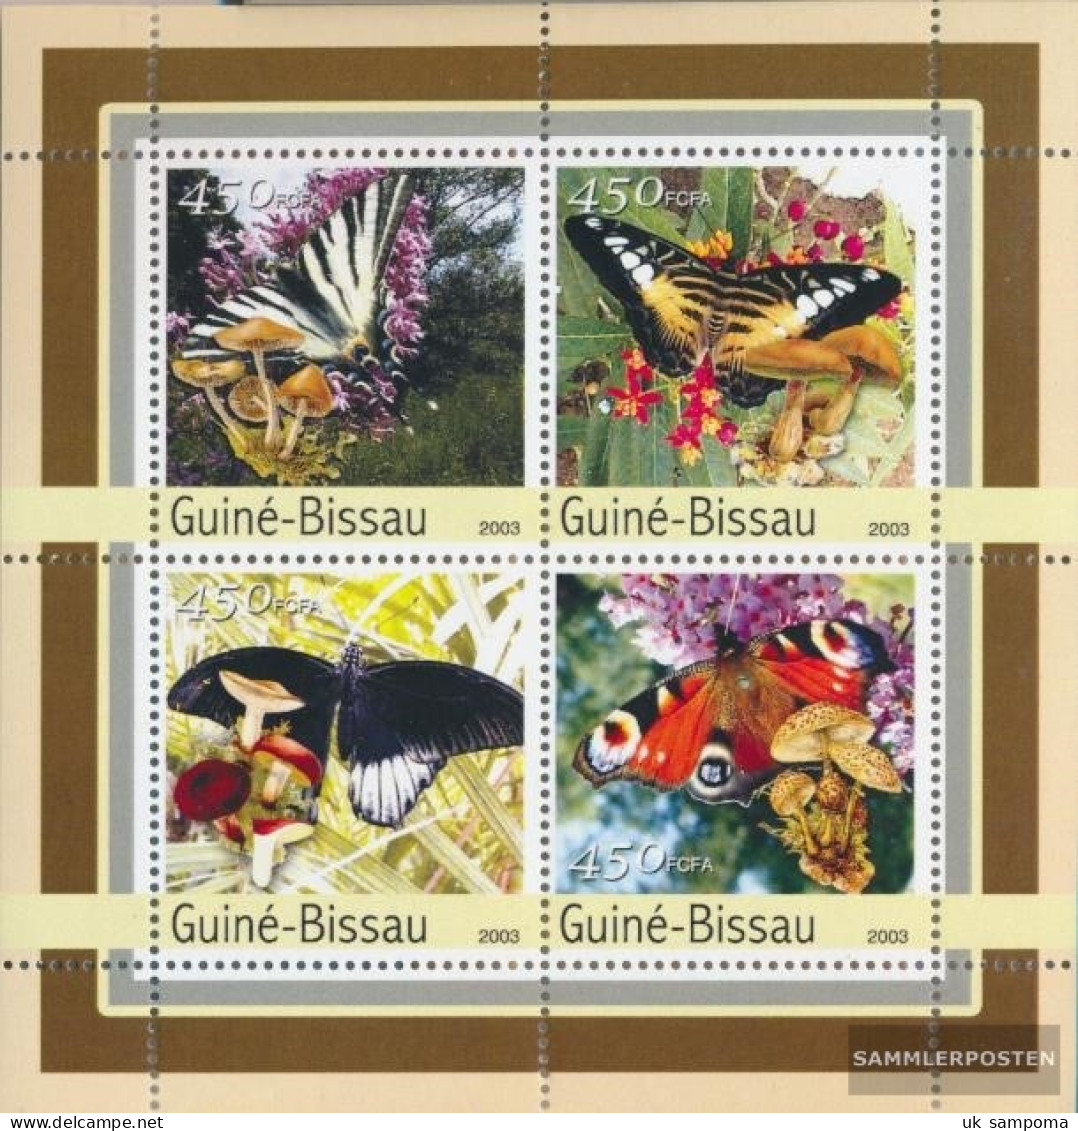 Guinea-Bissau 2087-2090 Sheetlet (complete. Issue) Unmounted Mint / Never Hinged 2003 Butterflies, Mushrooms - Guinea-Bissau